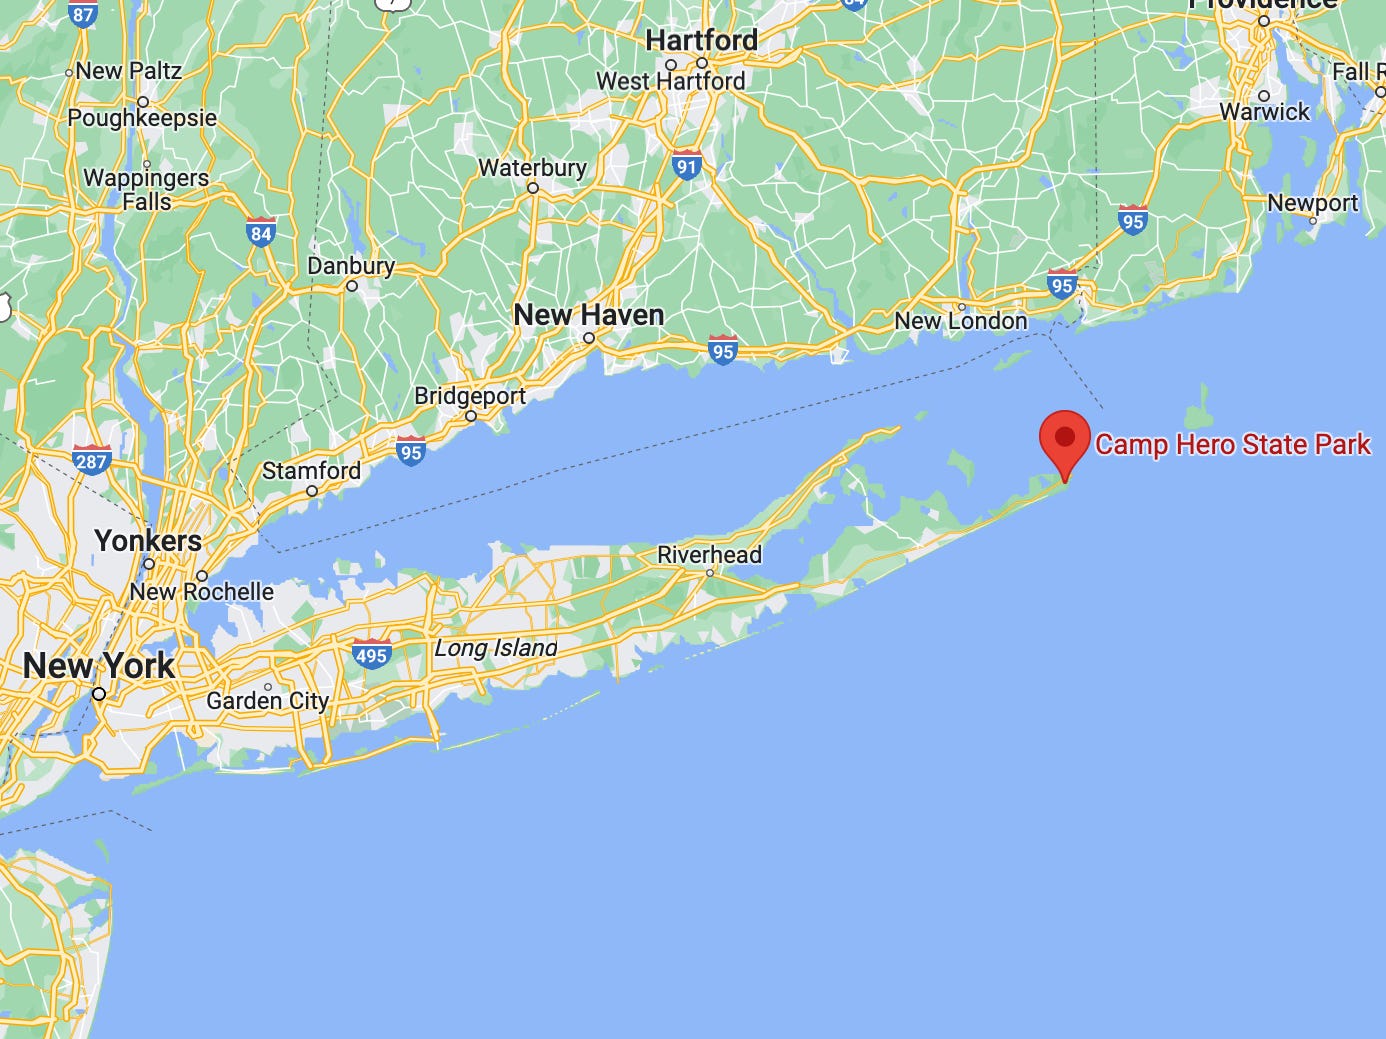 <p>Montauk is commonly known as The End. It's the last town on Long Island, making it the perfect spot for an Army base scanning the oceans for submarines hiding in the depths below.</p>